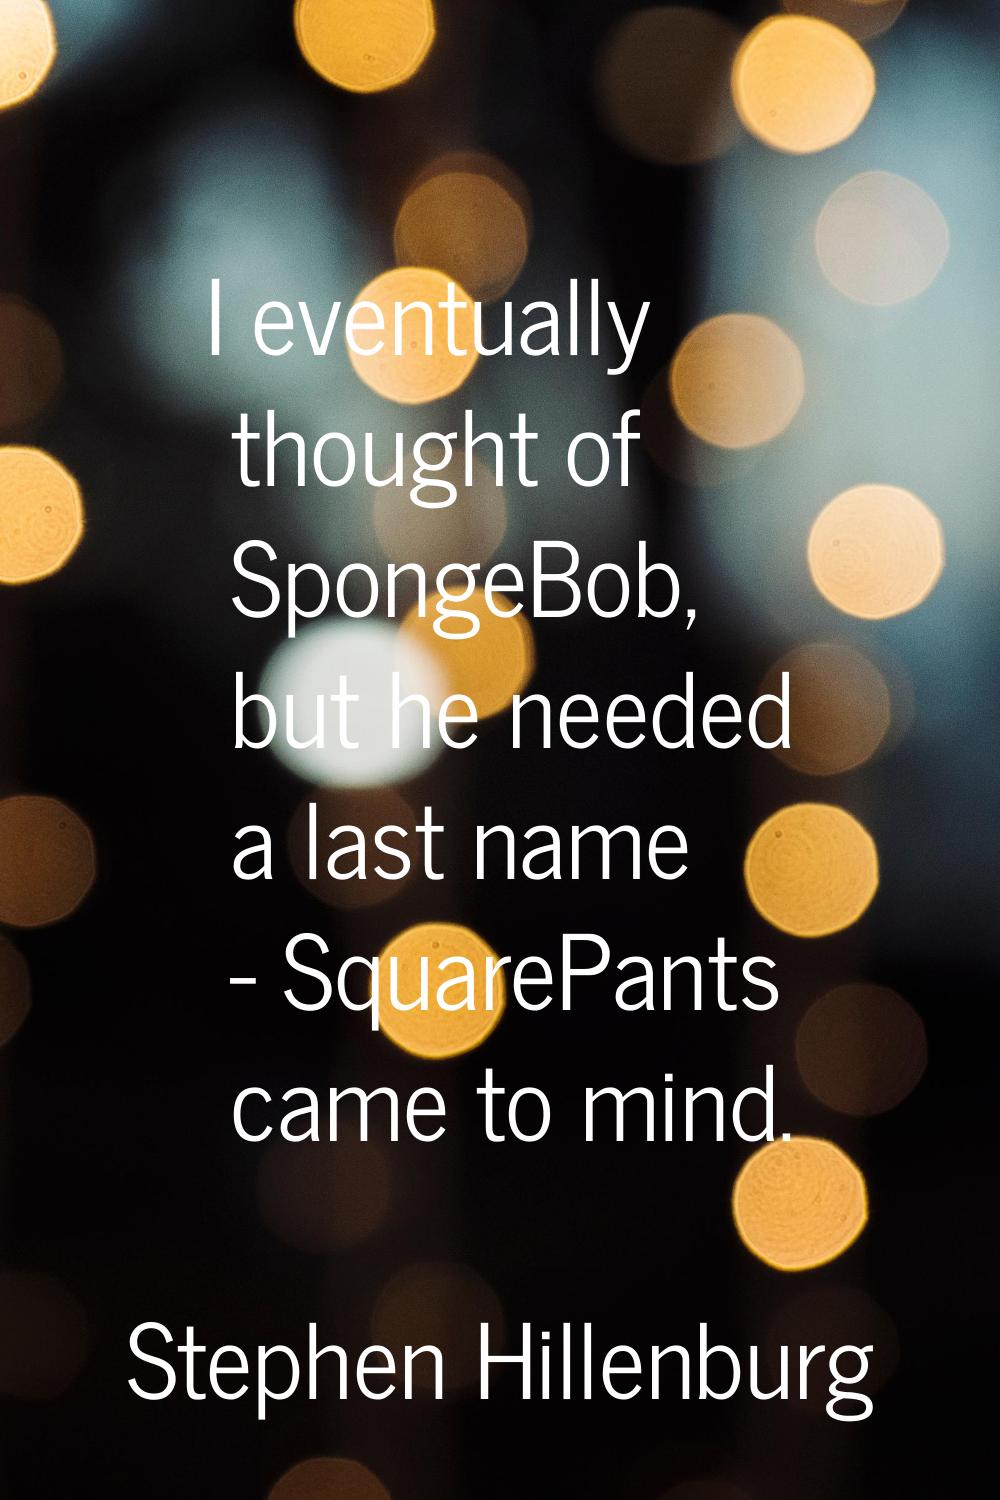 I eventually thought of SpongeBob, but he needed a last name - SquarePants came to mind.